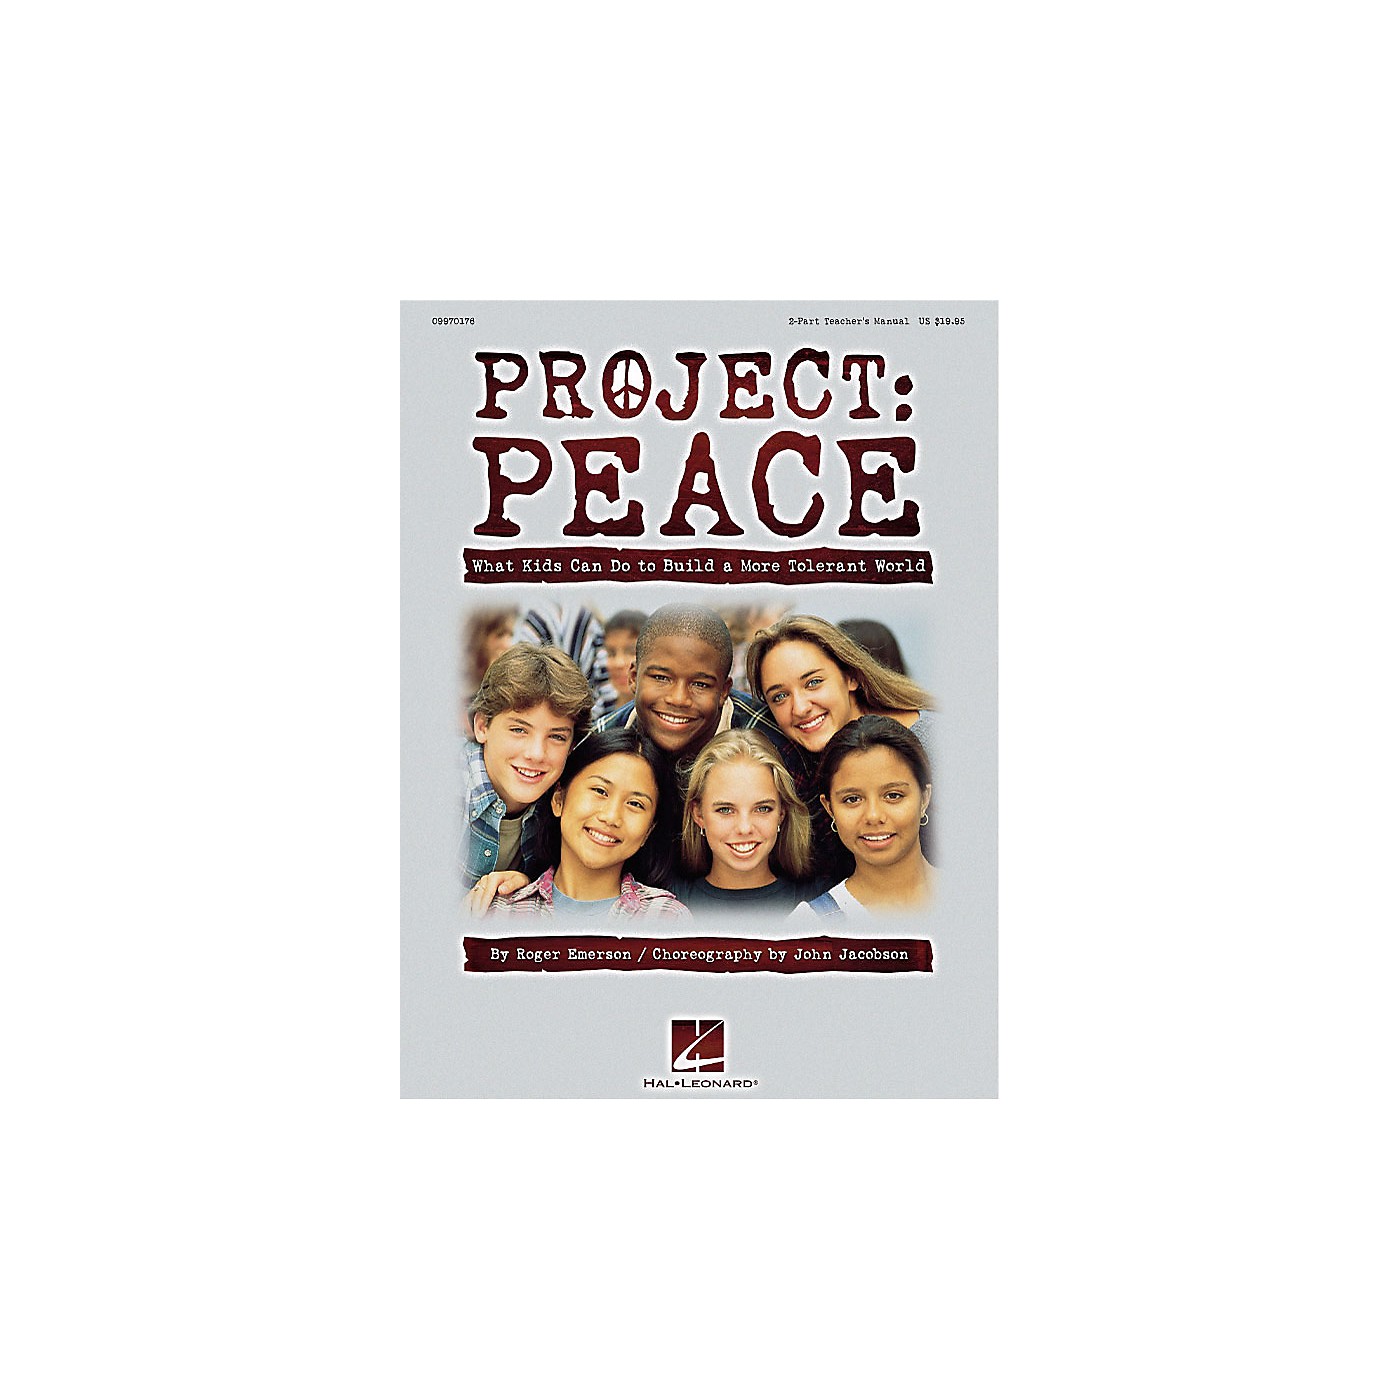 Hal Leonard Project: Peace - What Kids Can Do to Build a More Tolerant World (Musical) ShowTrax CD by Roger Emerson thumbnail